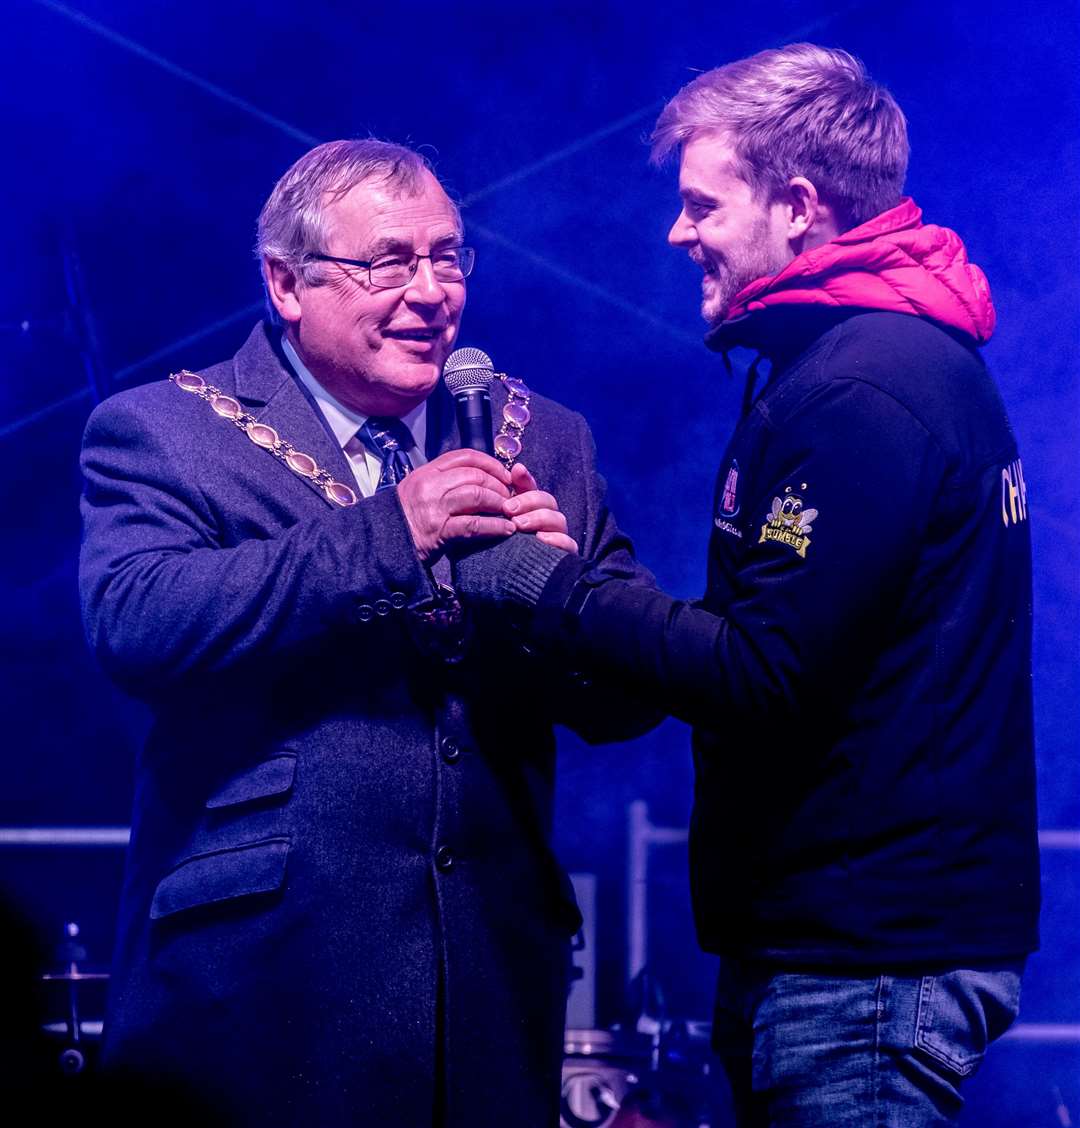 Scenes from the 2018 King’s Lynn Christmas Light Switch on - Borough Mayor Nick Daubney and KLFM’s Charles Dennett on stage. Picture: Matthew Usher